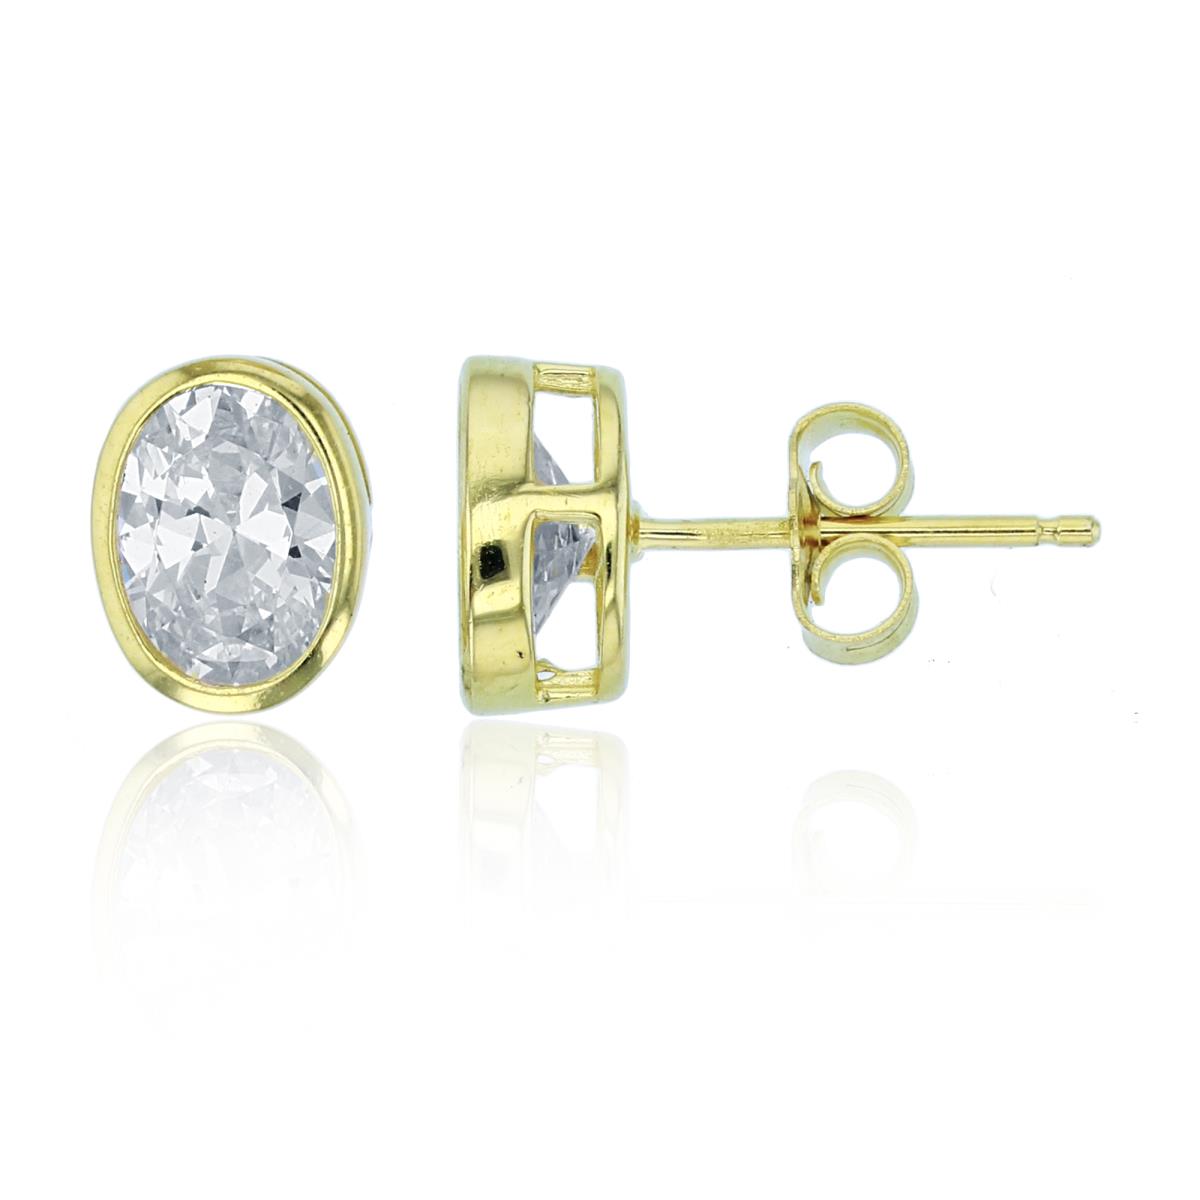 Sterling Silver+1Micron Yellow Gold 8x6mm Oval CZ Bezel Studs